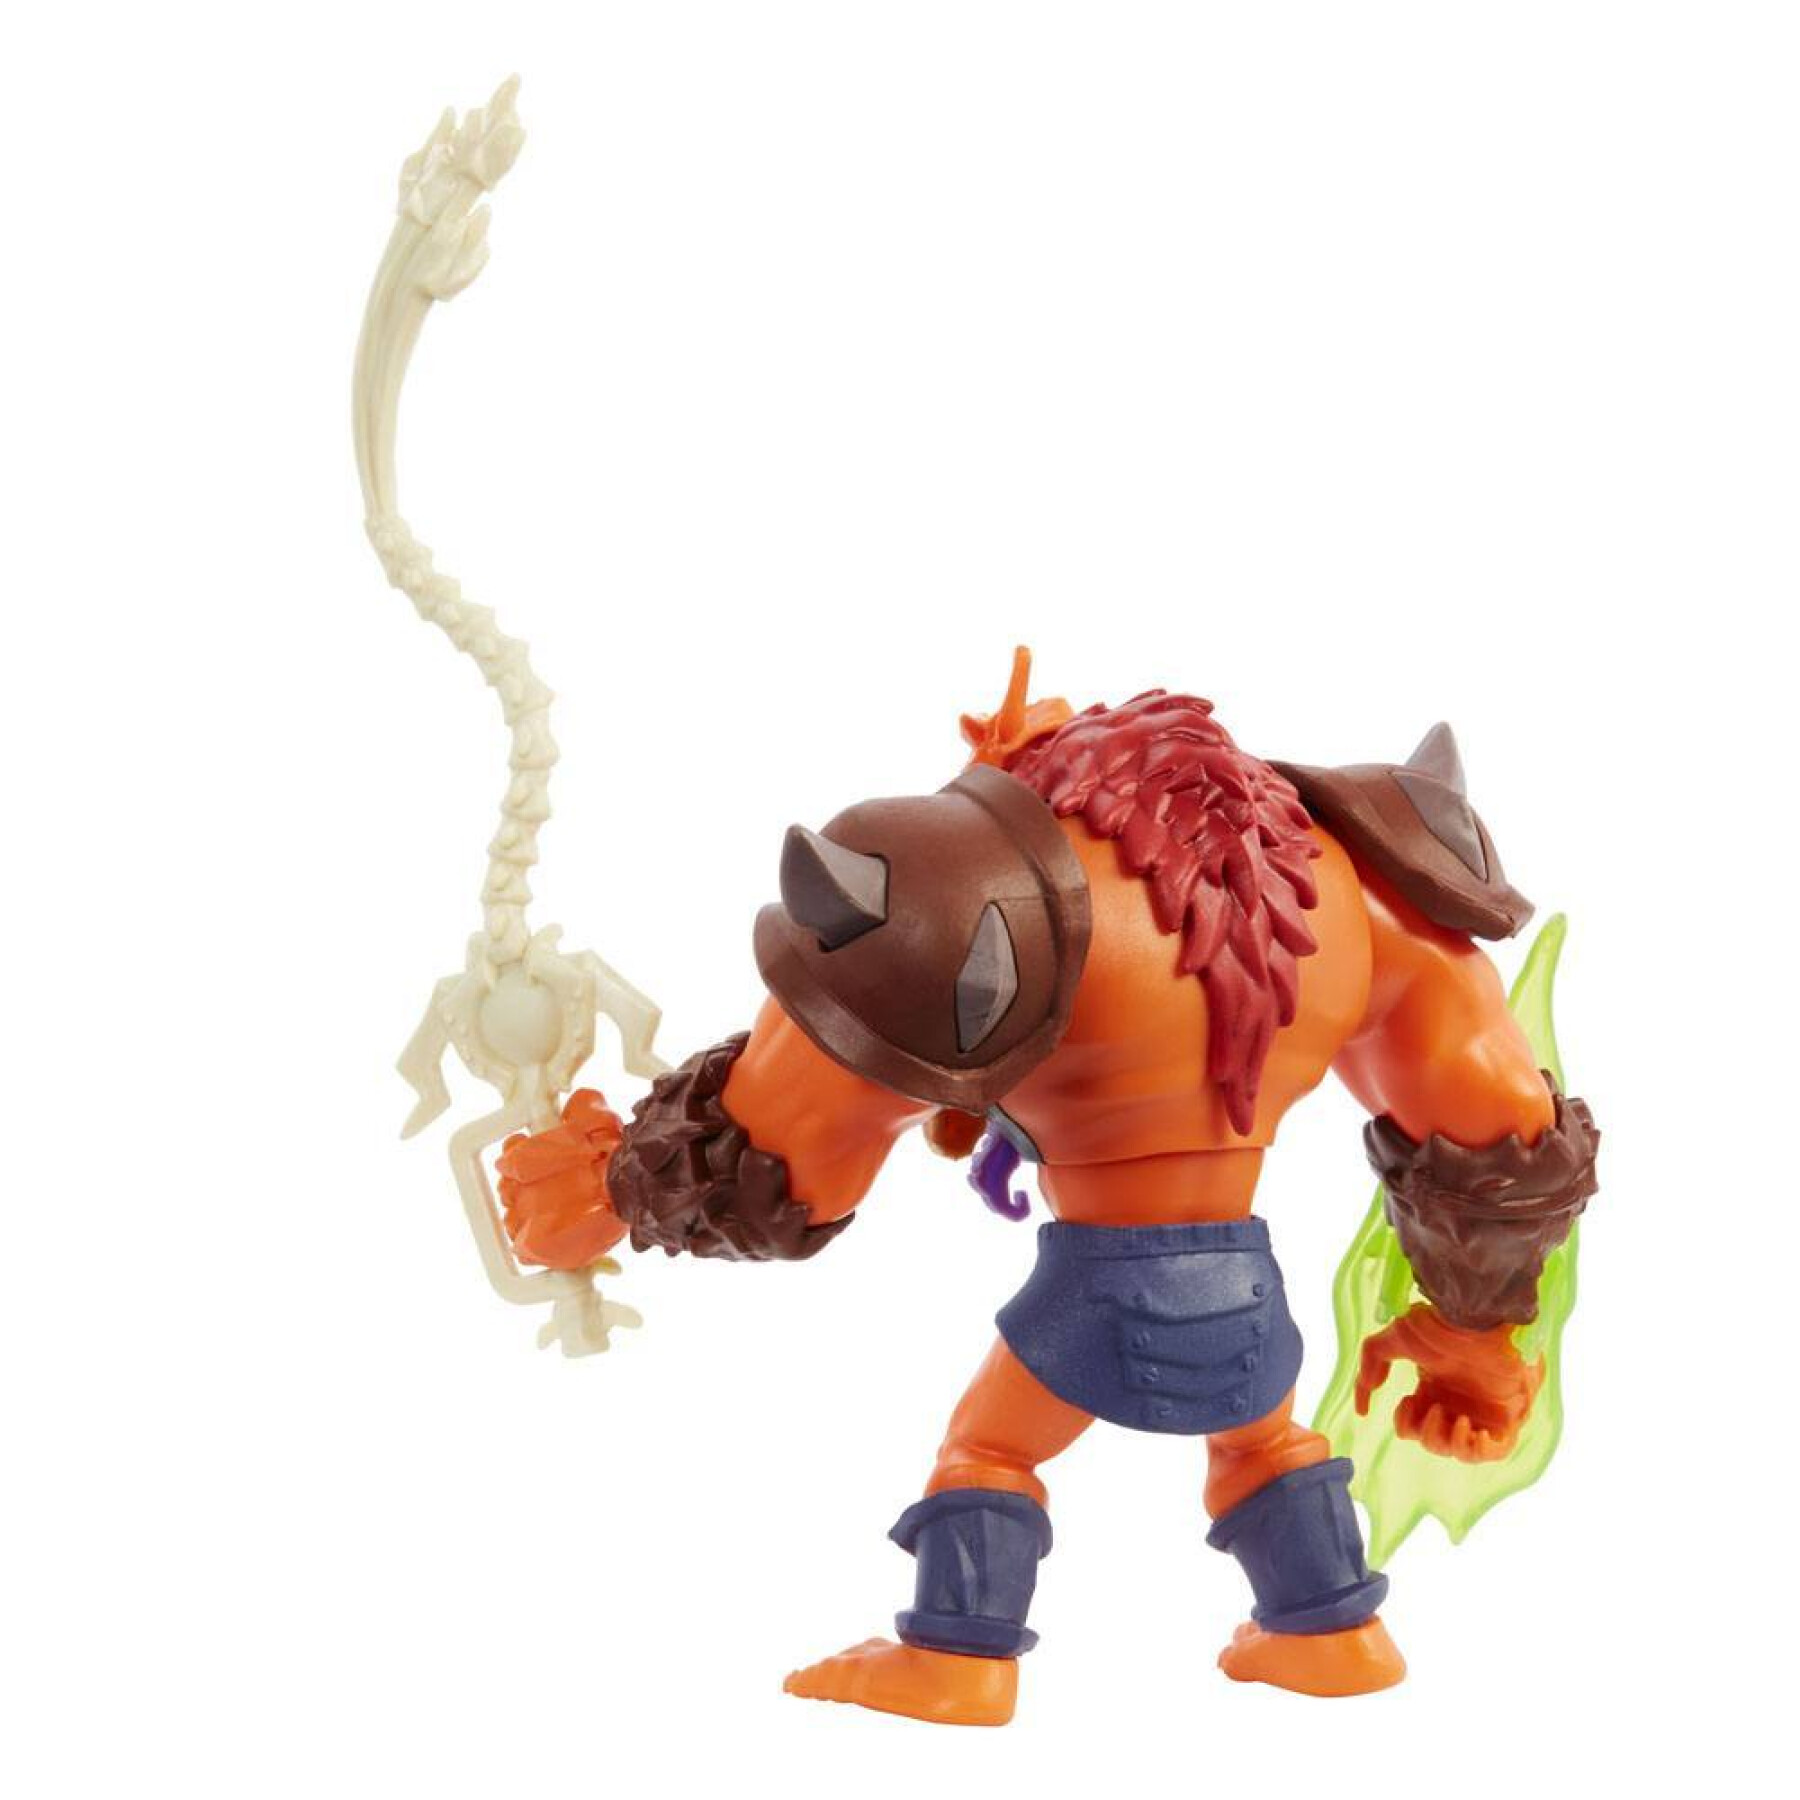 Figurina Mattel He-Man and the Masters of the Universe 2022 Deluxe Beast Man